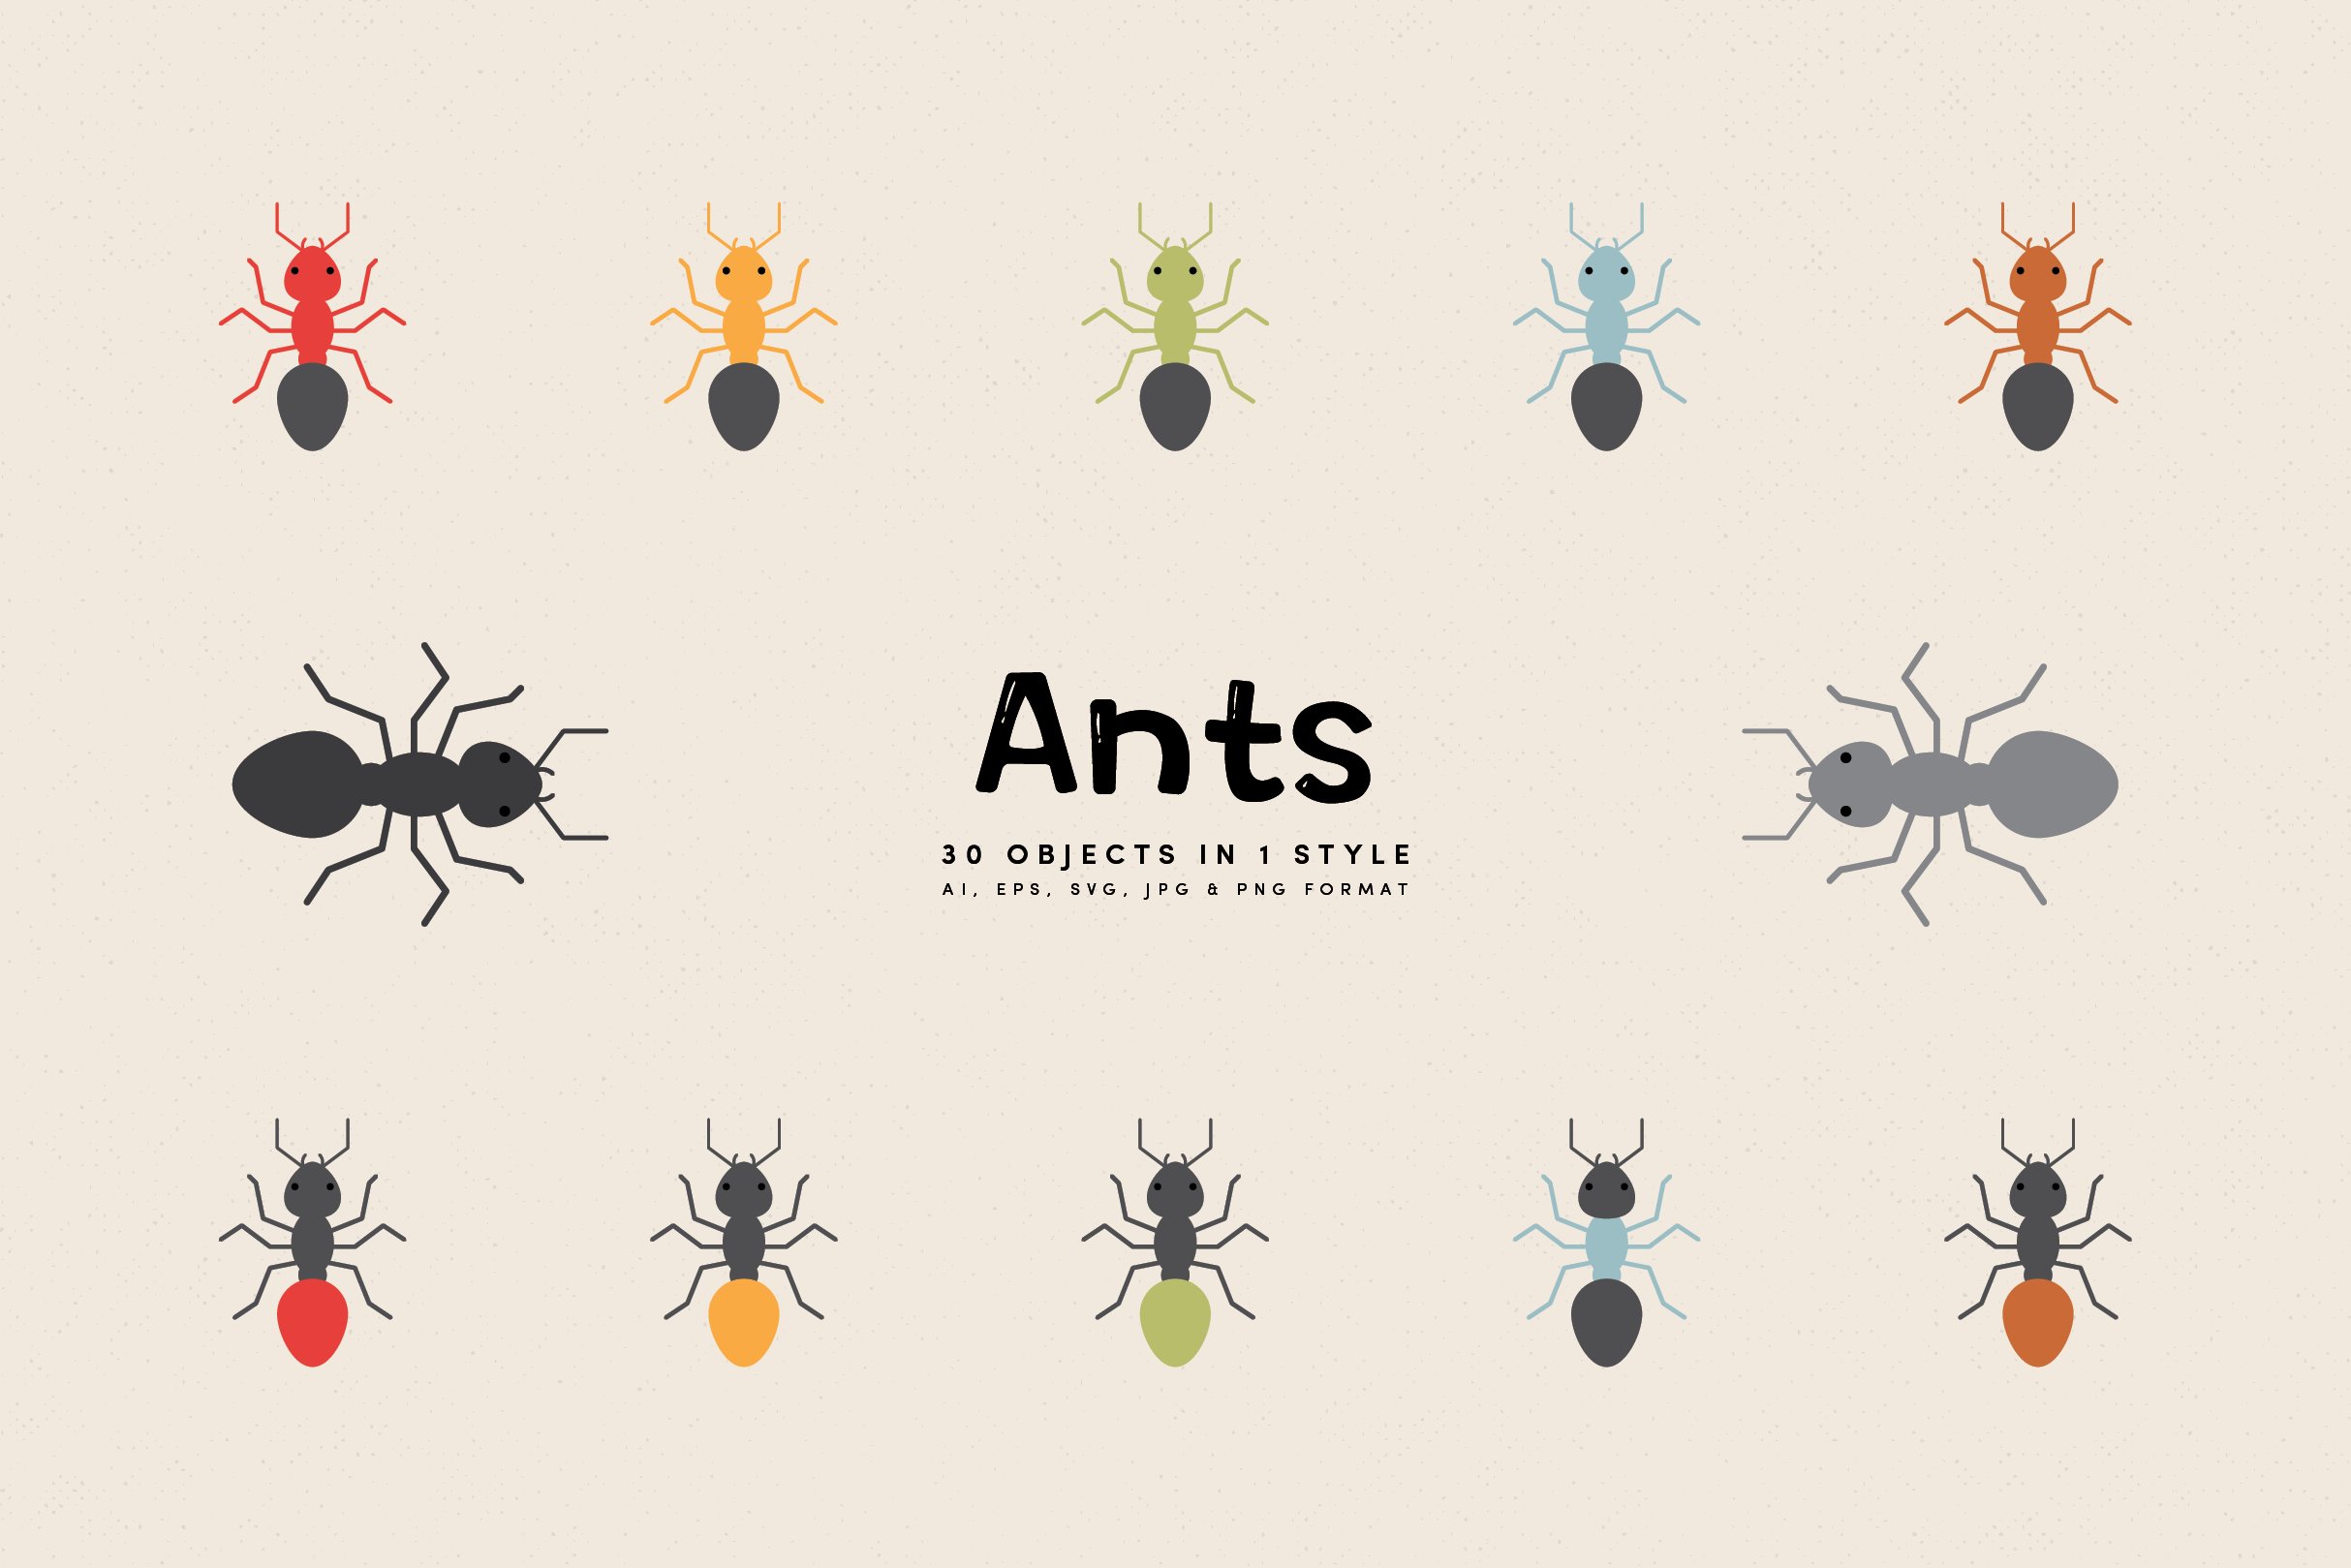 Ants cover image.